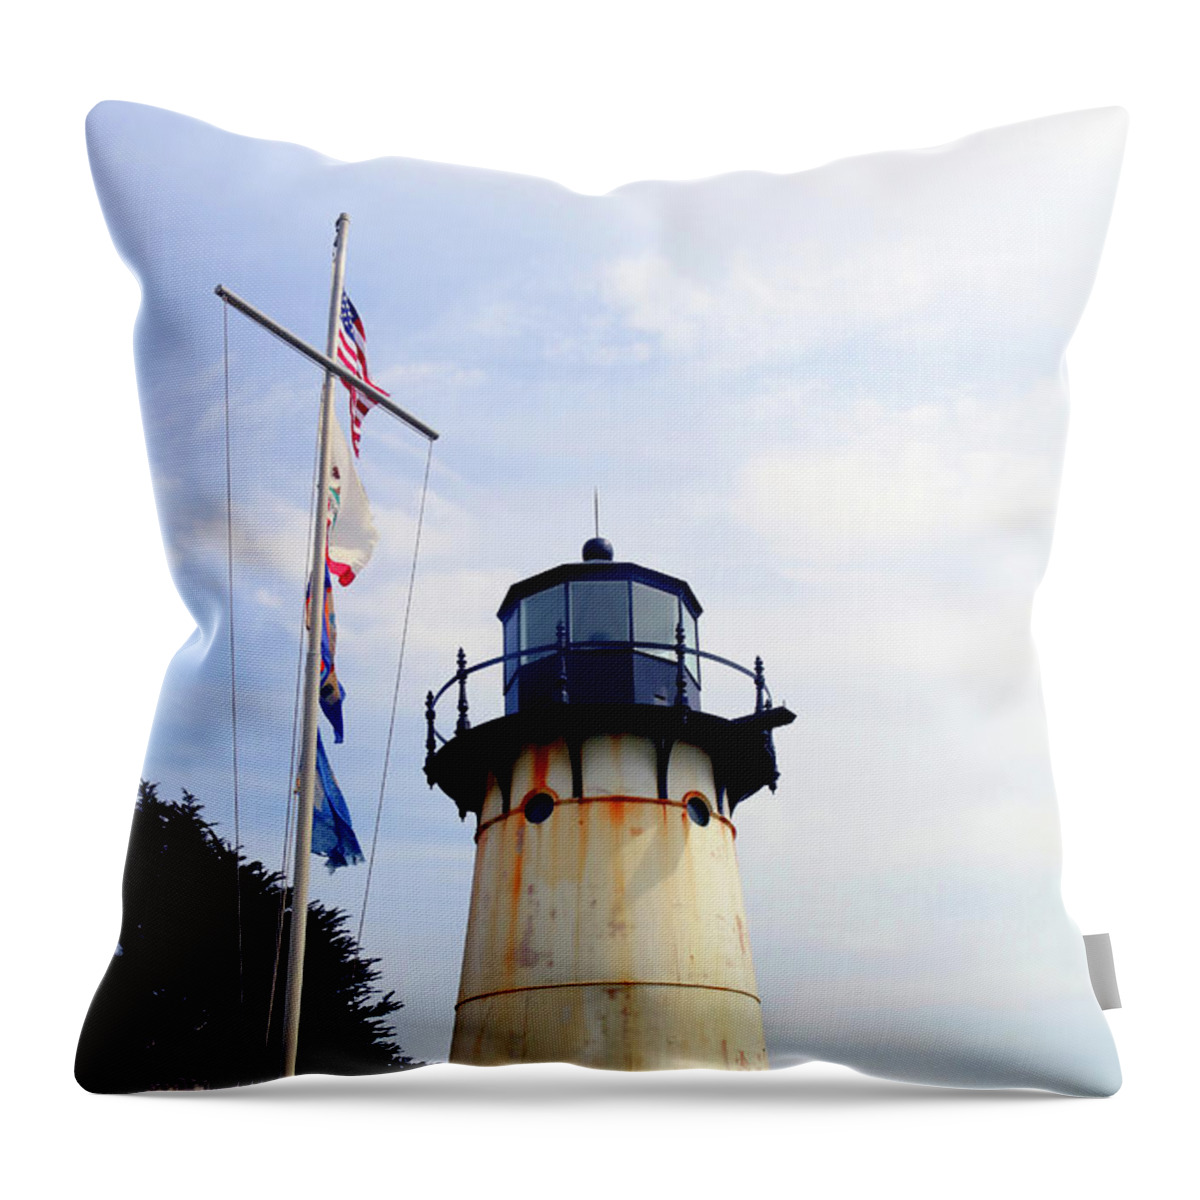 Lighthouses Throw Pillow featuring the photograph Montara Light by Art Block Collections